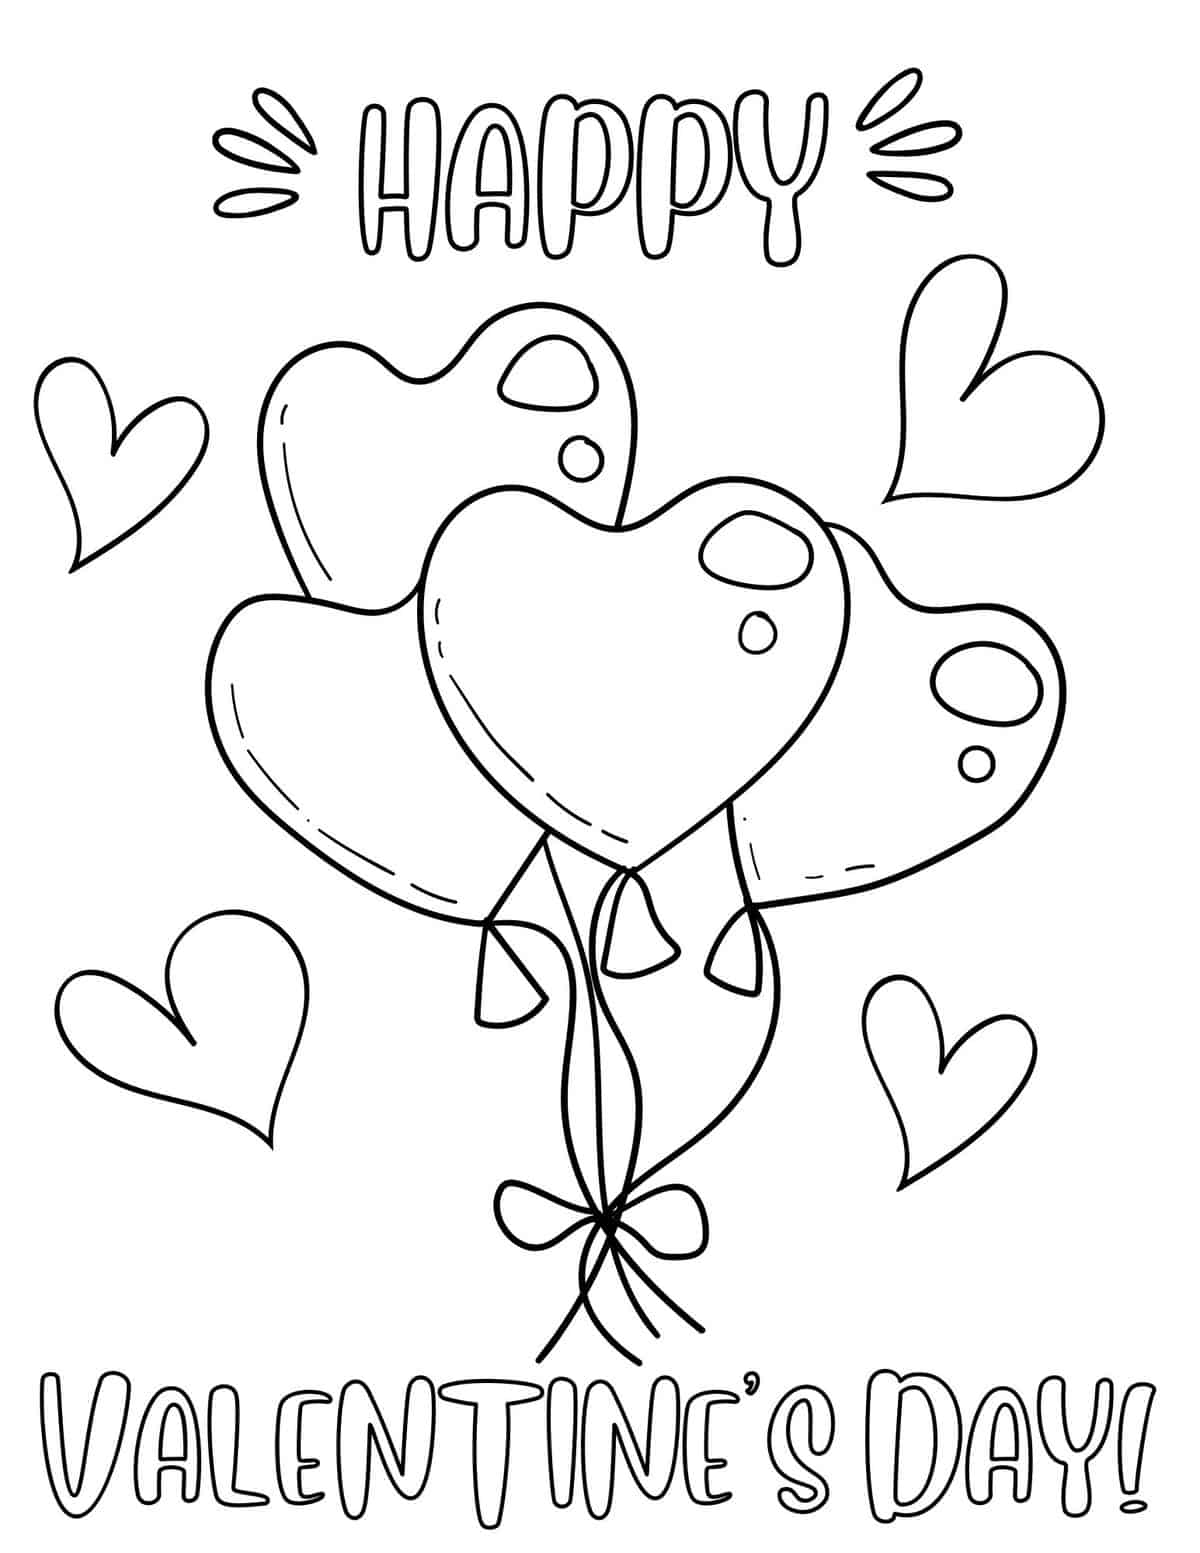 Valentine's Day coloring page with heart balloons